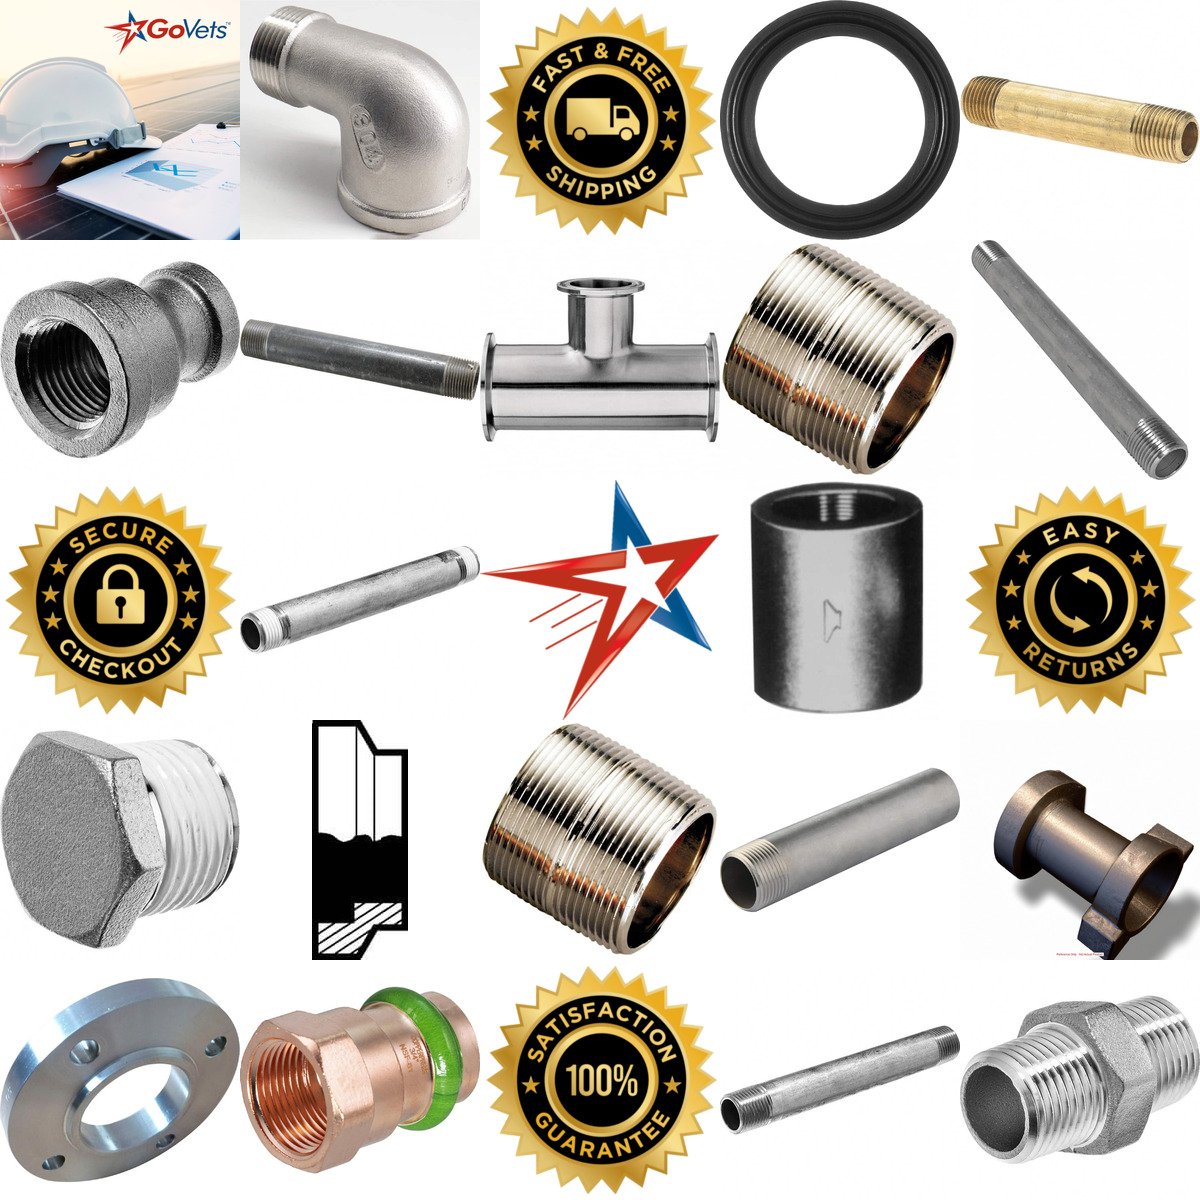 A selection of Plumbing and Pipe Fittings products on GoVets